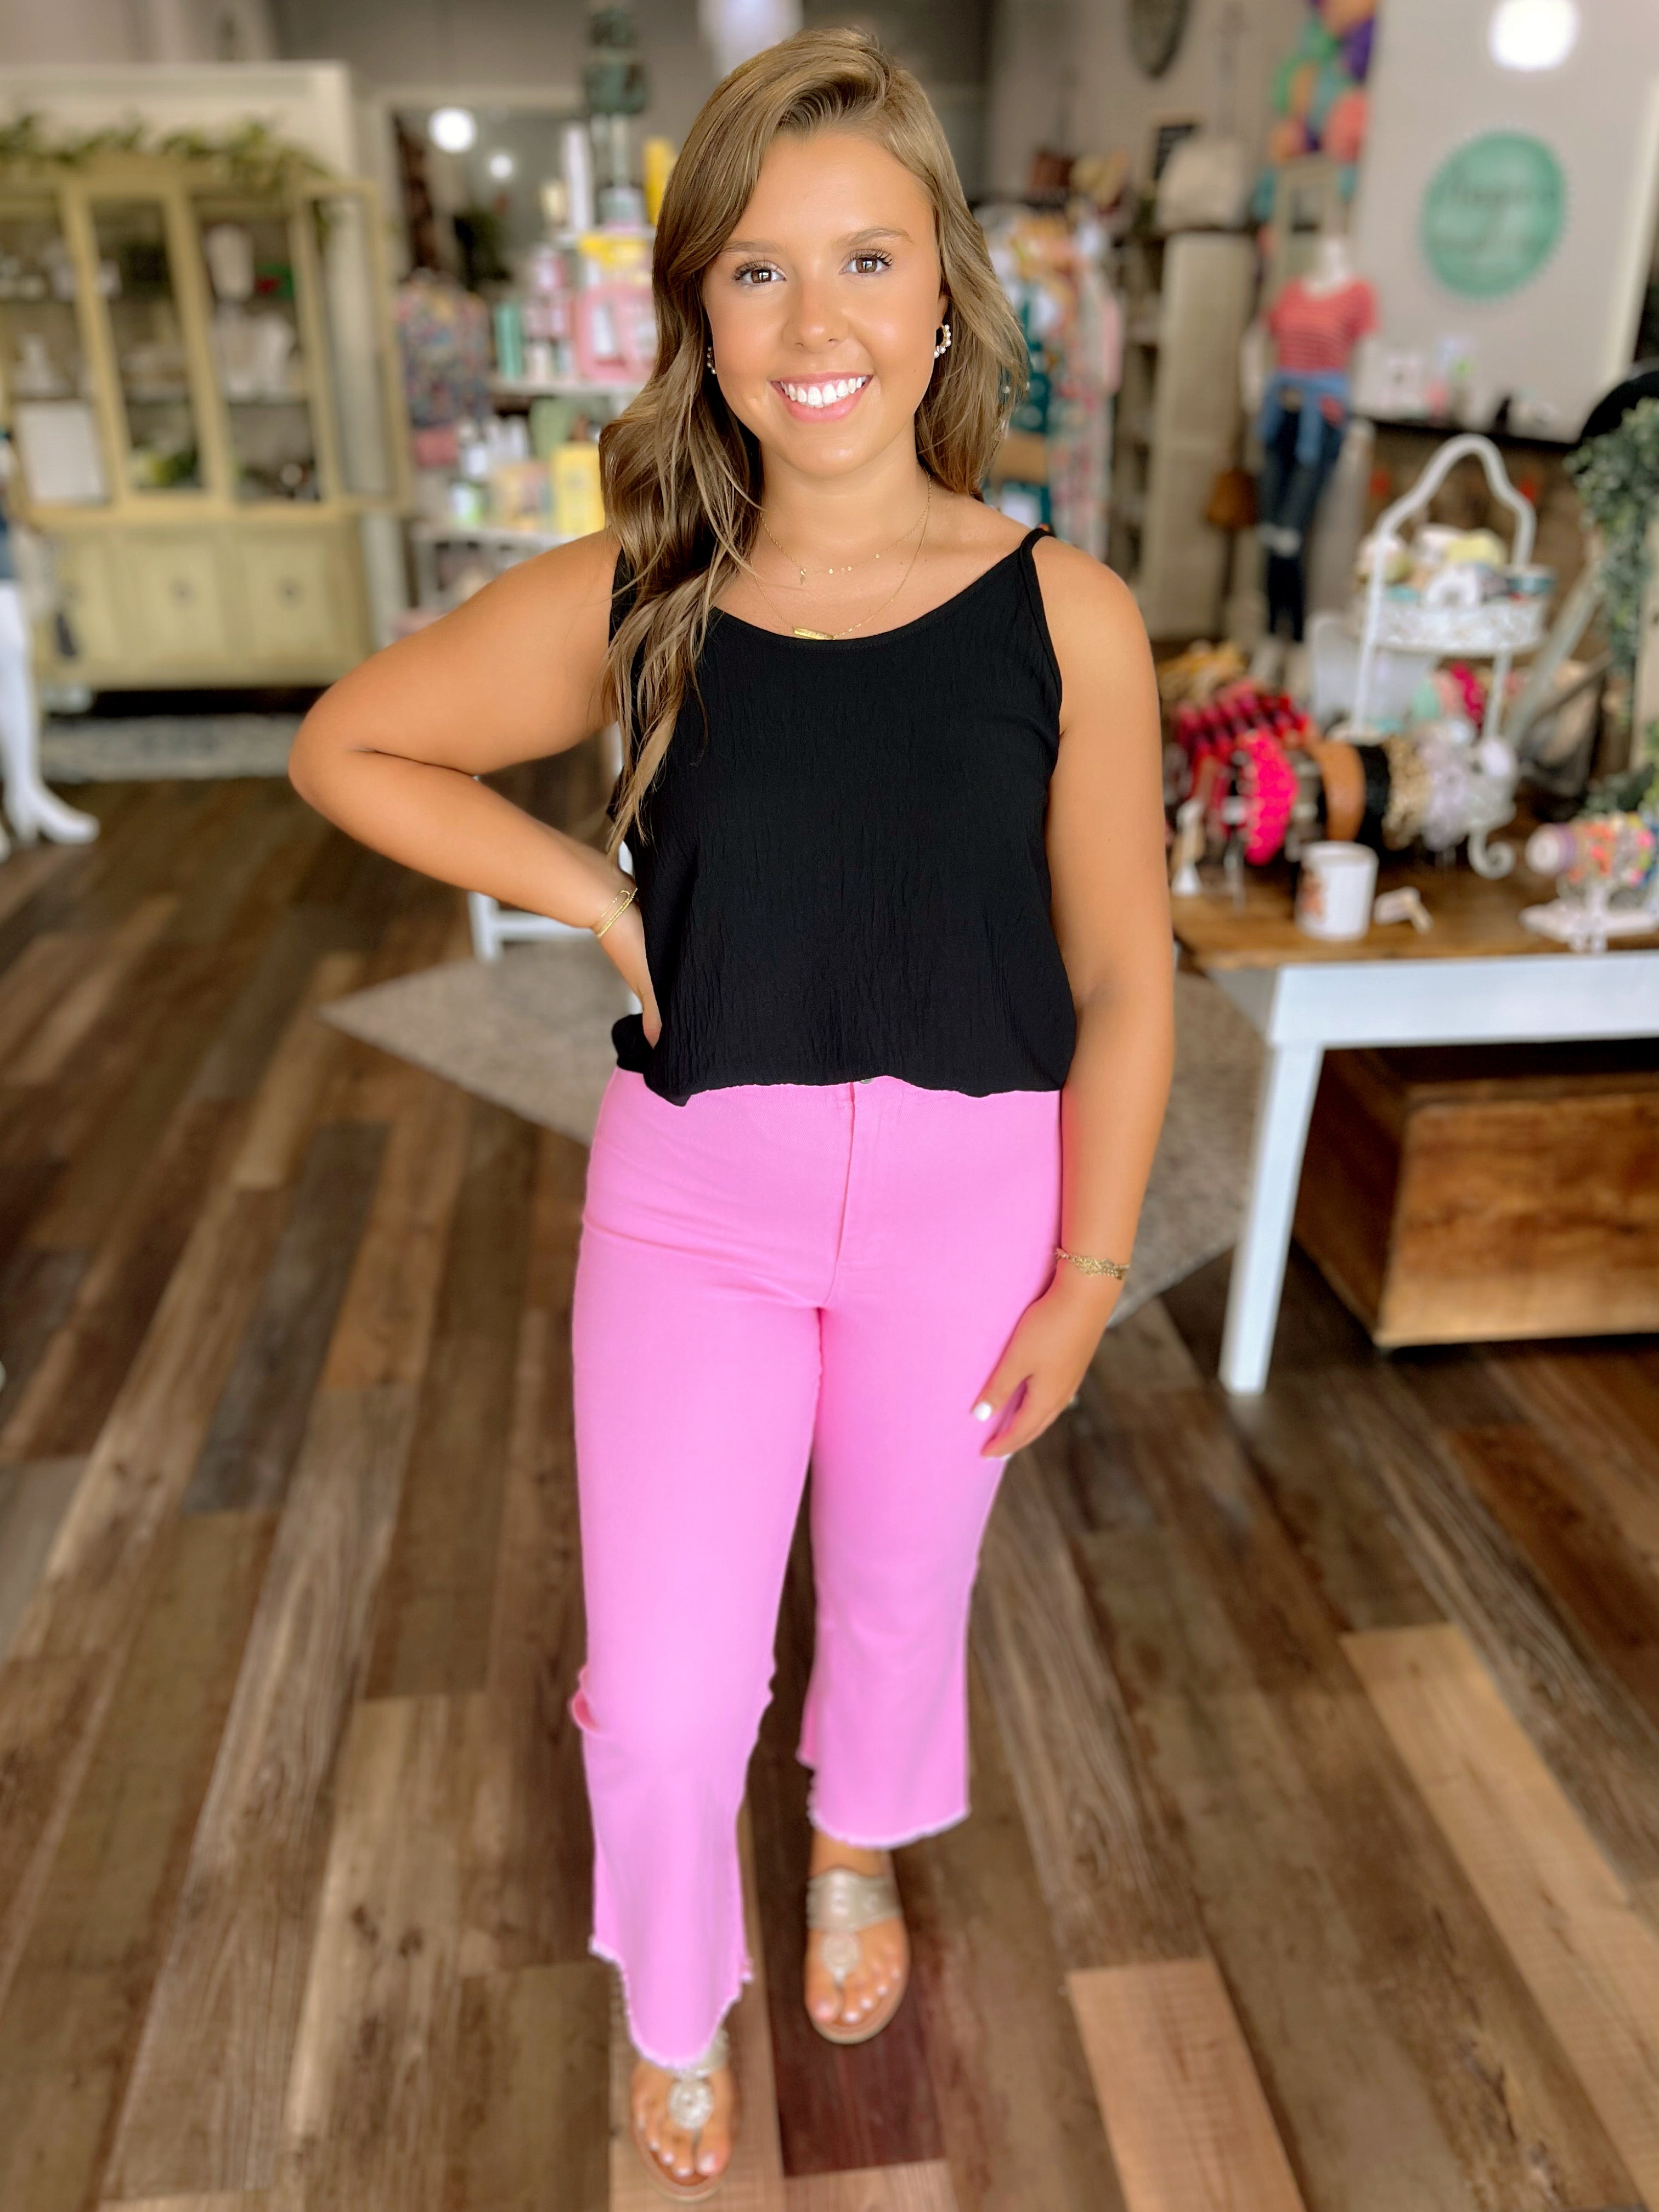 Morning star-shines, the pink pants say hello 🌟💗 . . . . . vancouver  fashion, style inspo, outfit of the day, summer style inspirat... |  Instagram